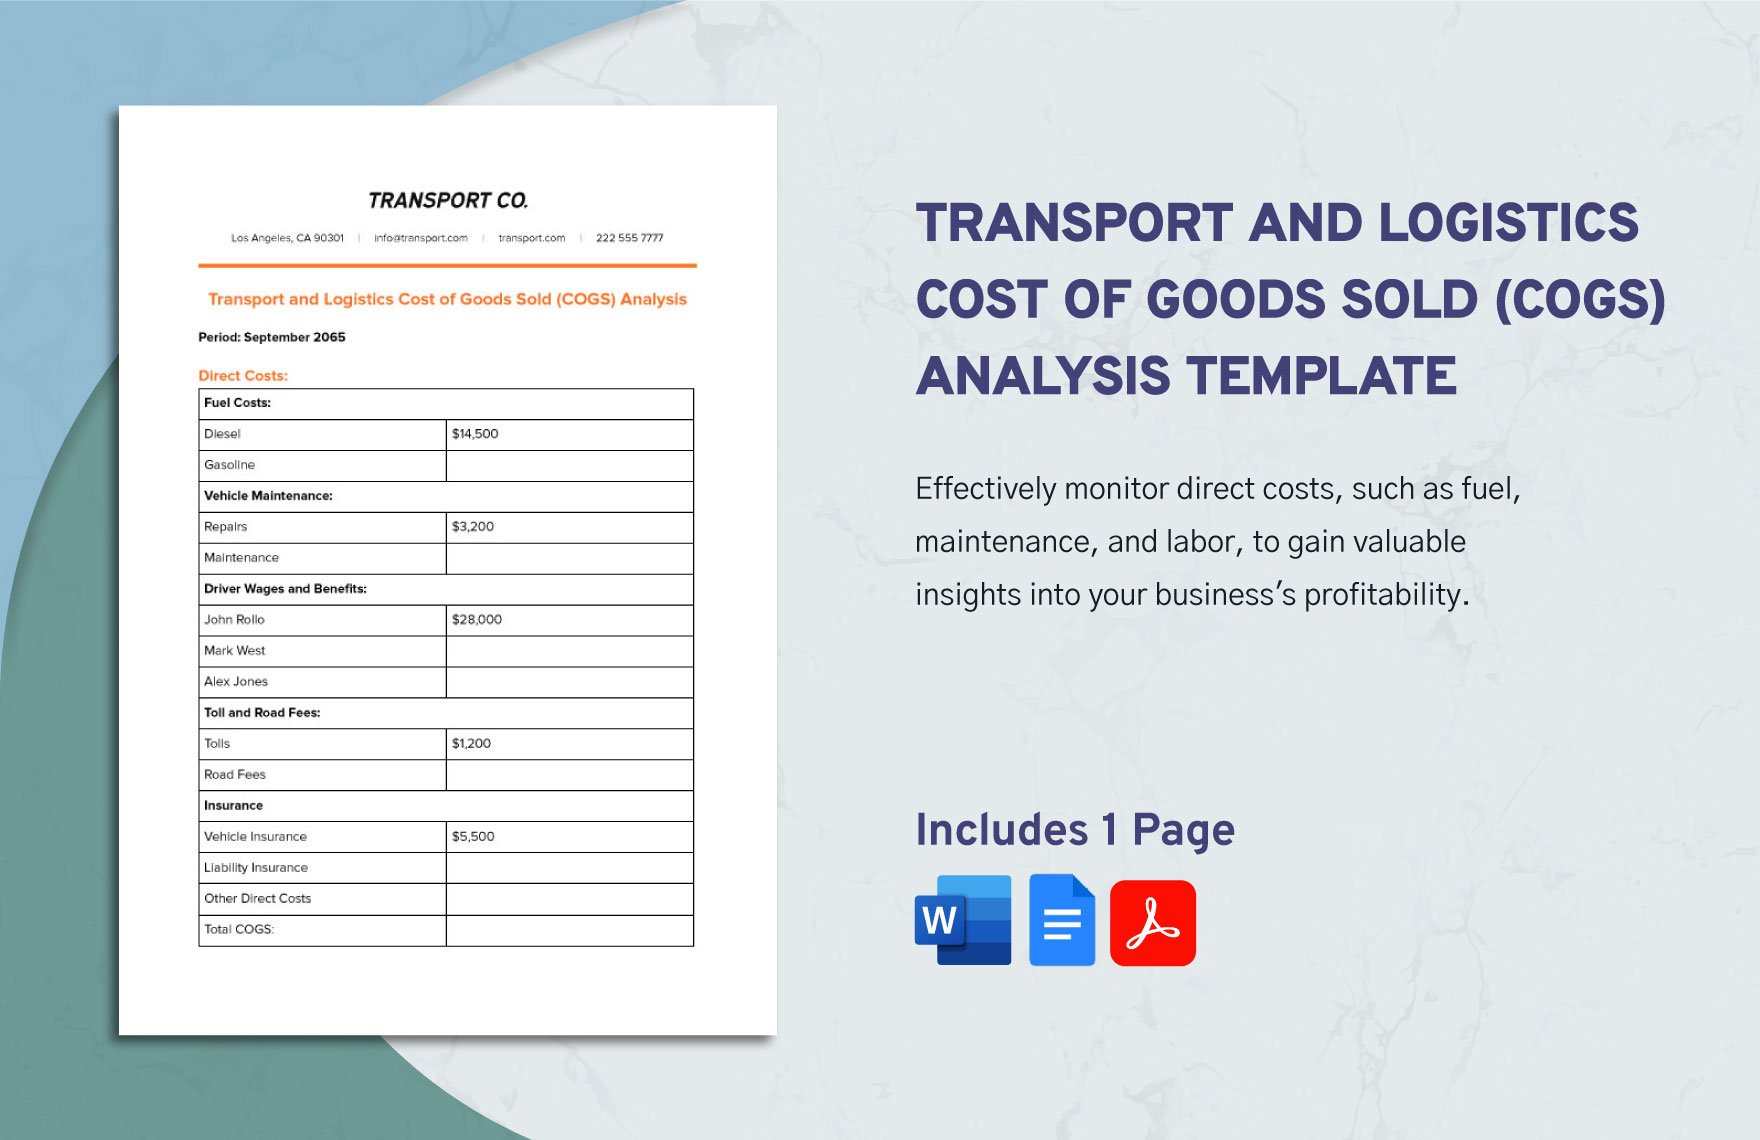 Transport and Logistics Cost of Goods Sold (COGS) Analysis Template